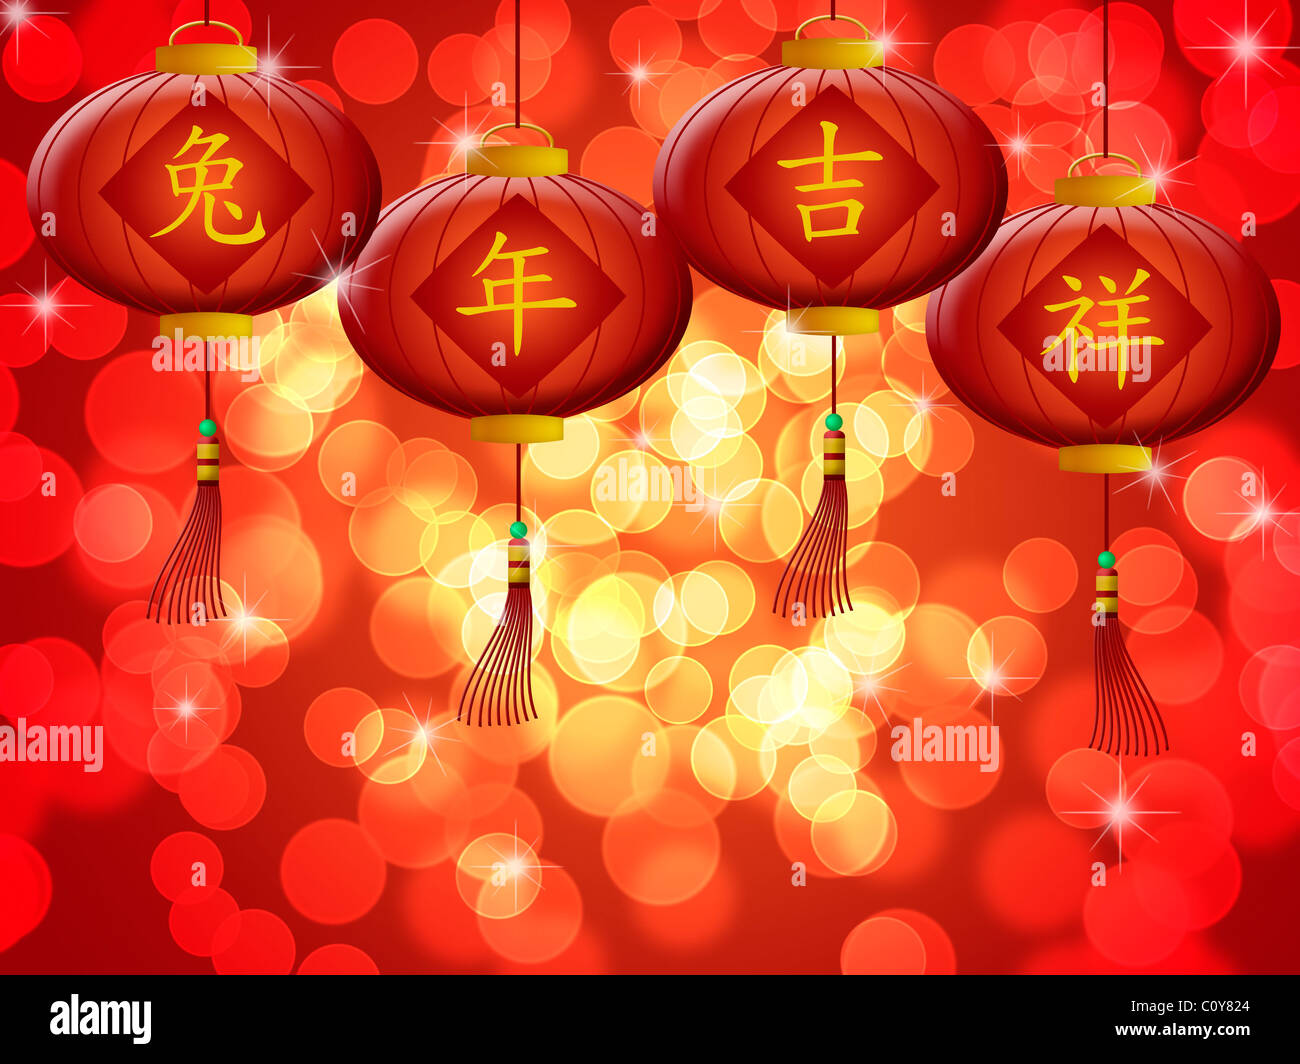 Happy Chinese New Year 2011 Rabbit with Red Lanterns Bokeh Illustration Stock Photo